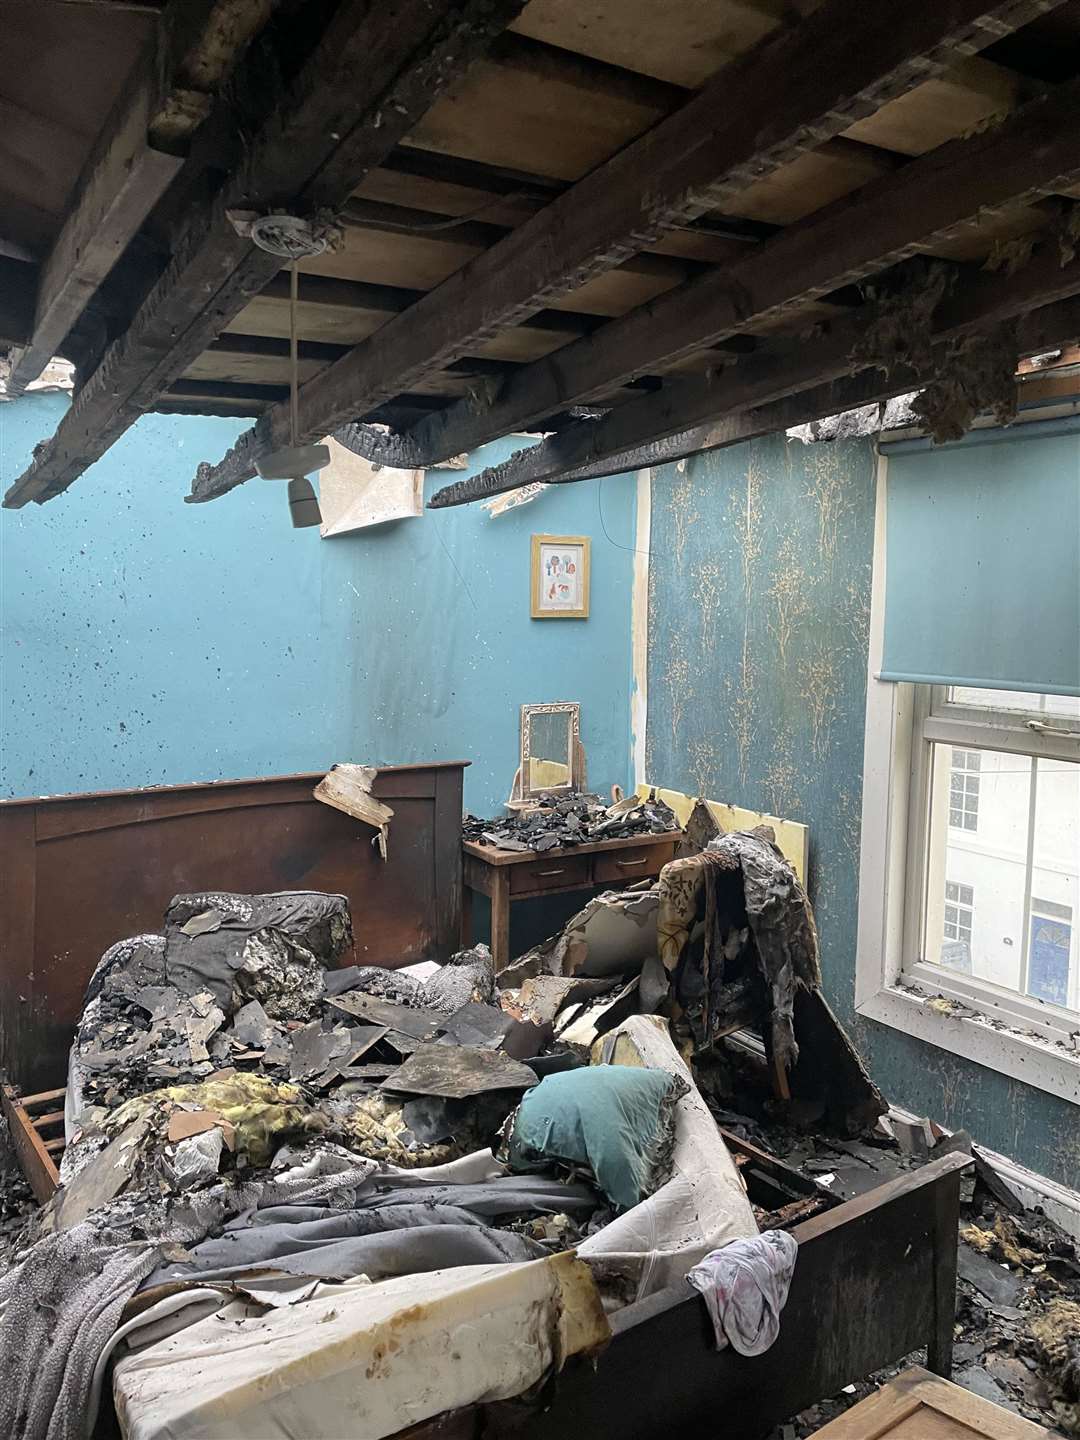 A wrecked bedroom after the fire. Picture from Zoey Cross